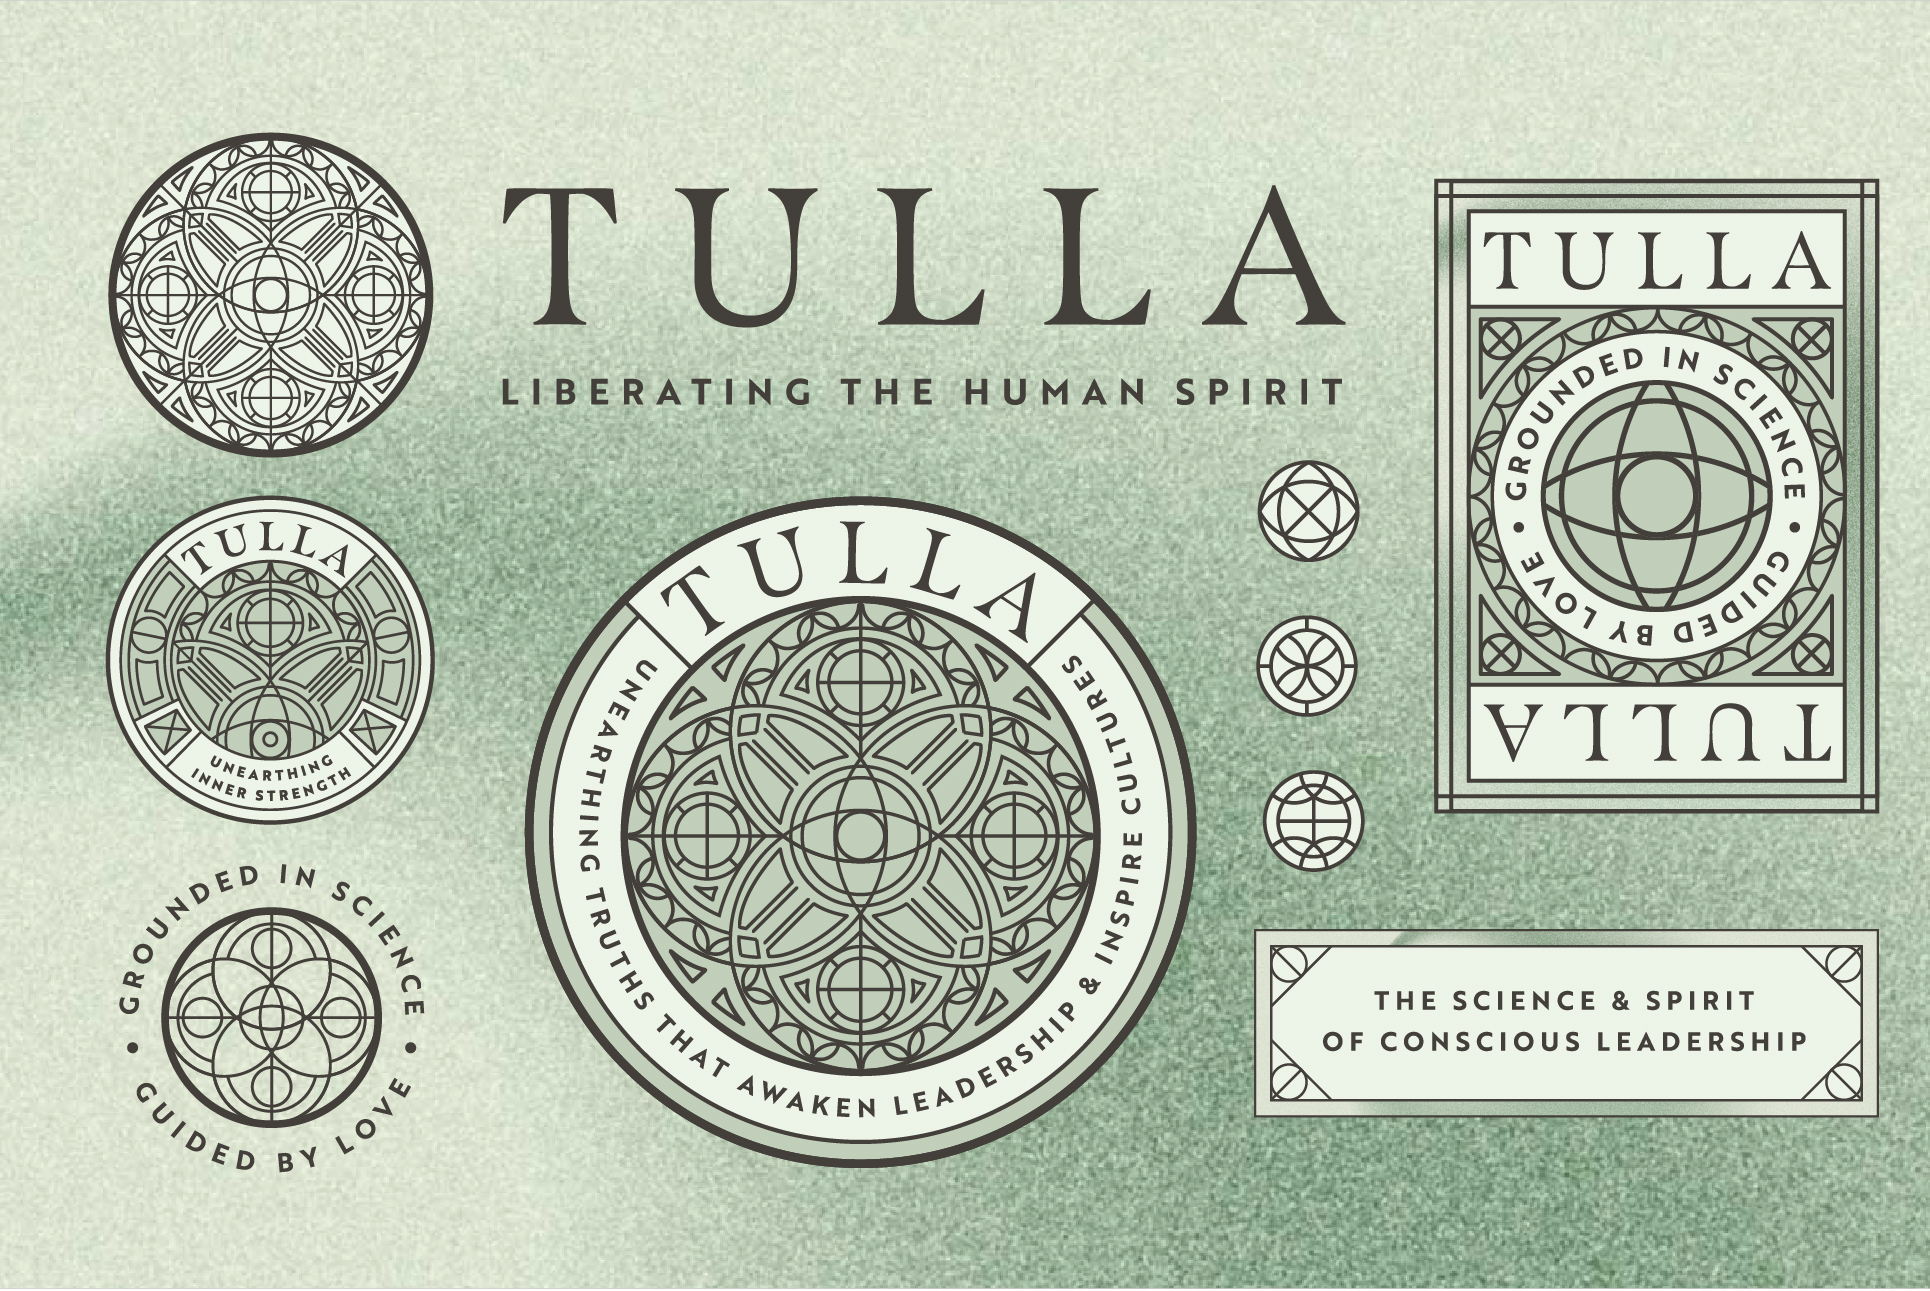 general public branding company brand for Tulla professional coaching and services